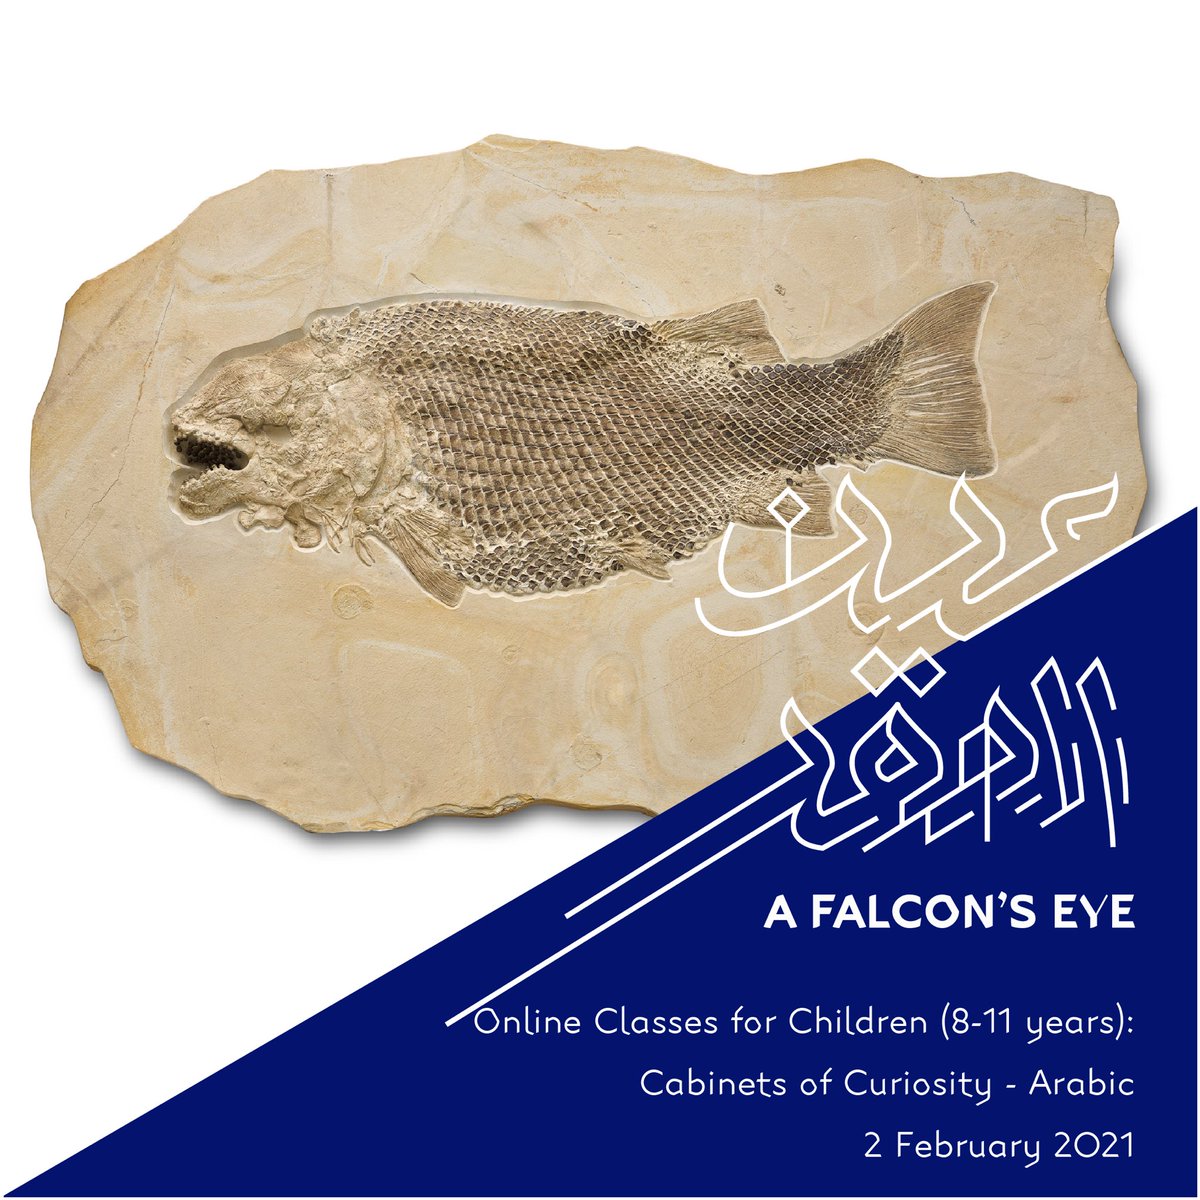 Sheikh Saoud was passionate about Cabinets of Curiosity, ways of displaying a wide range of objects to help people understand natural history and classical art in particular. Join us in this online course Book at qm.org.qa/en/cabinets-cu…